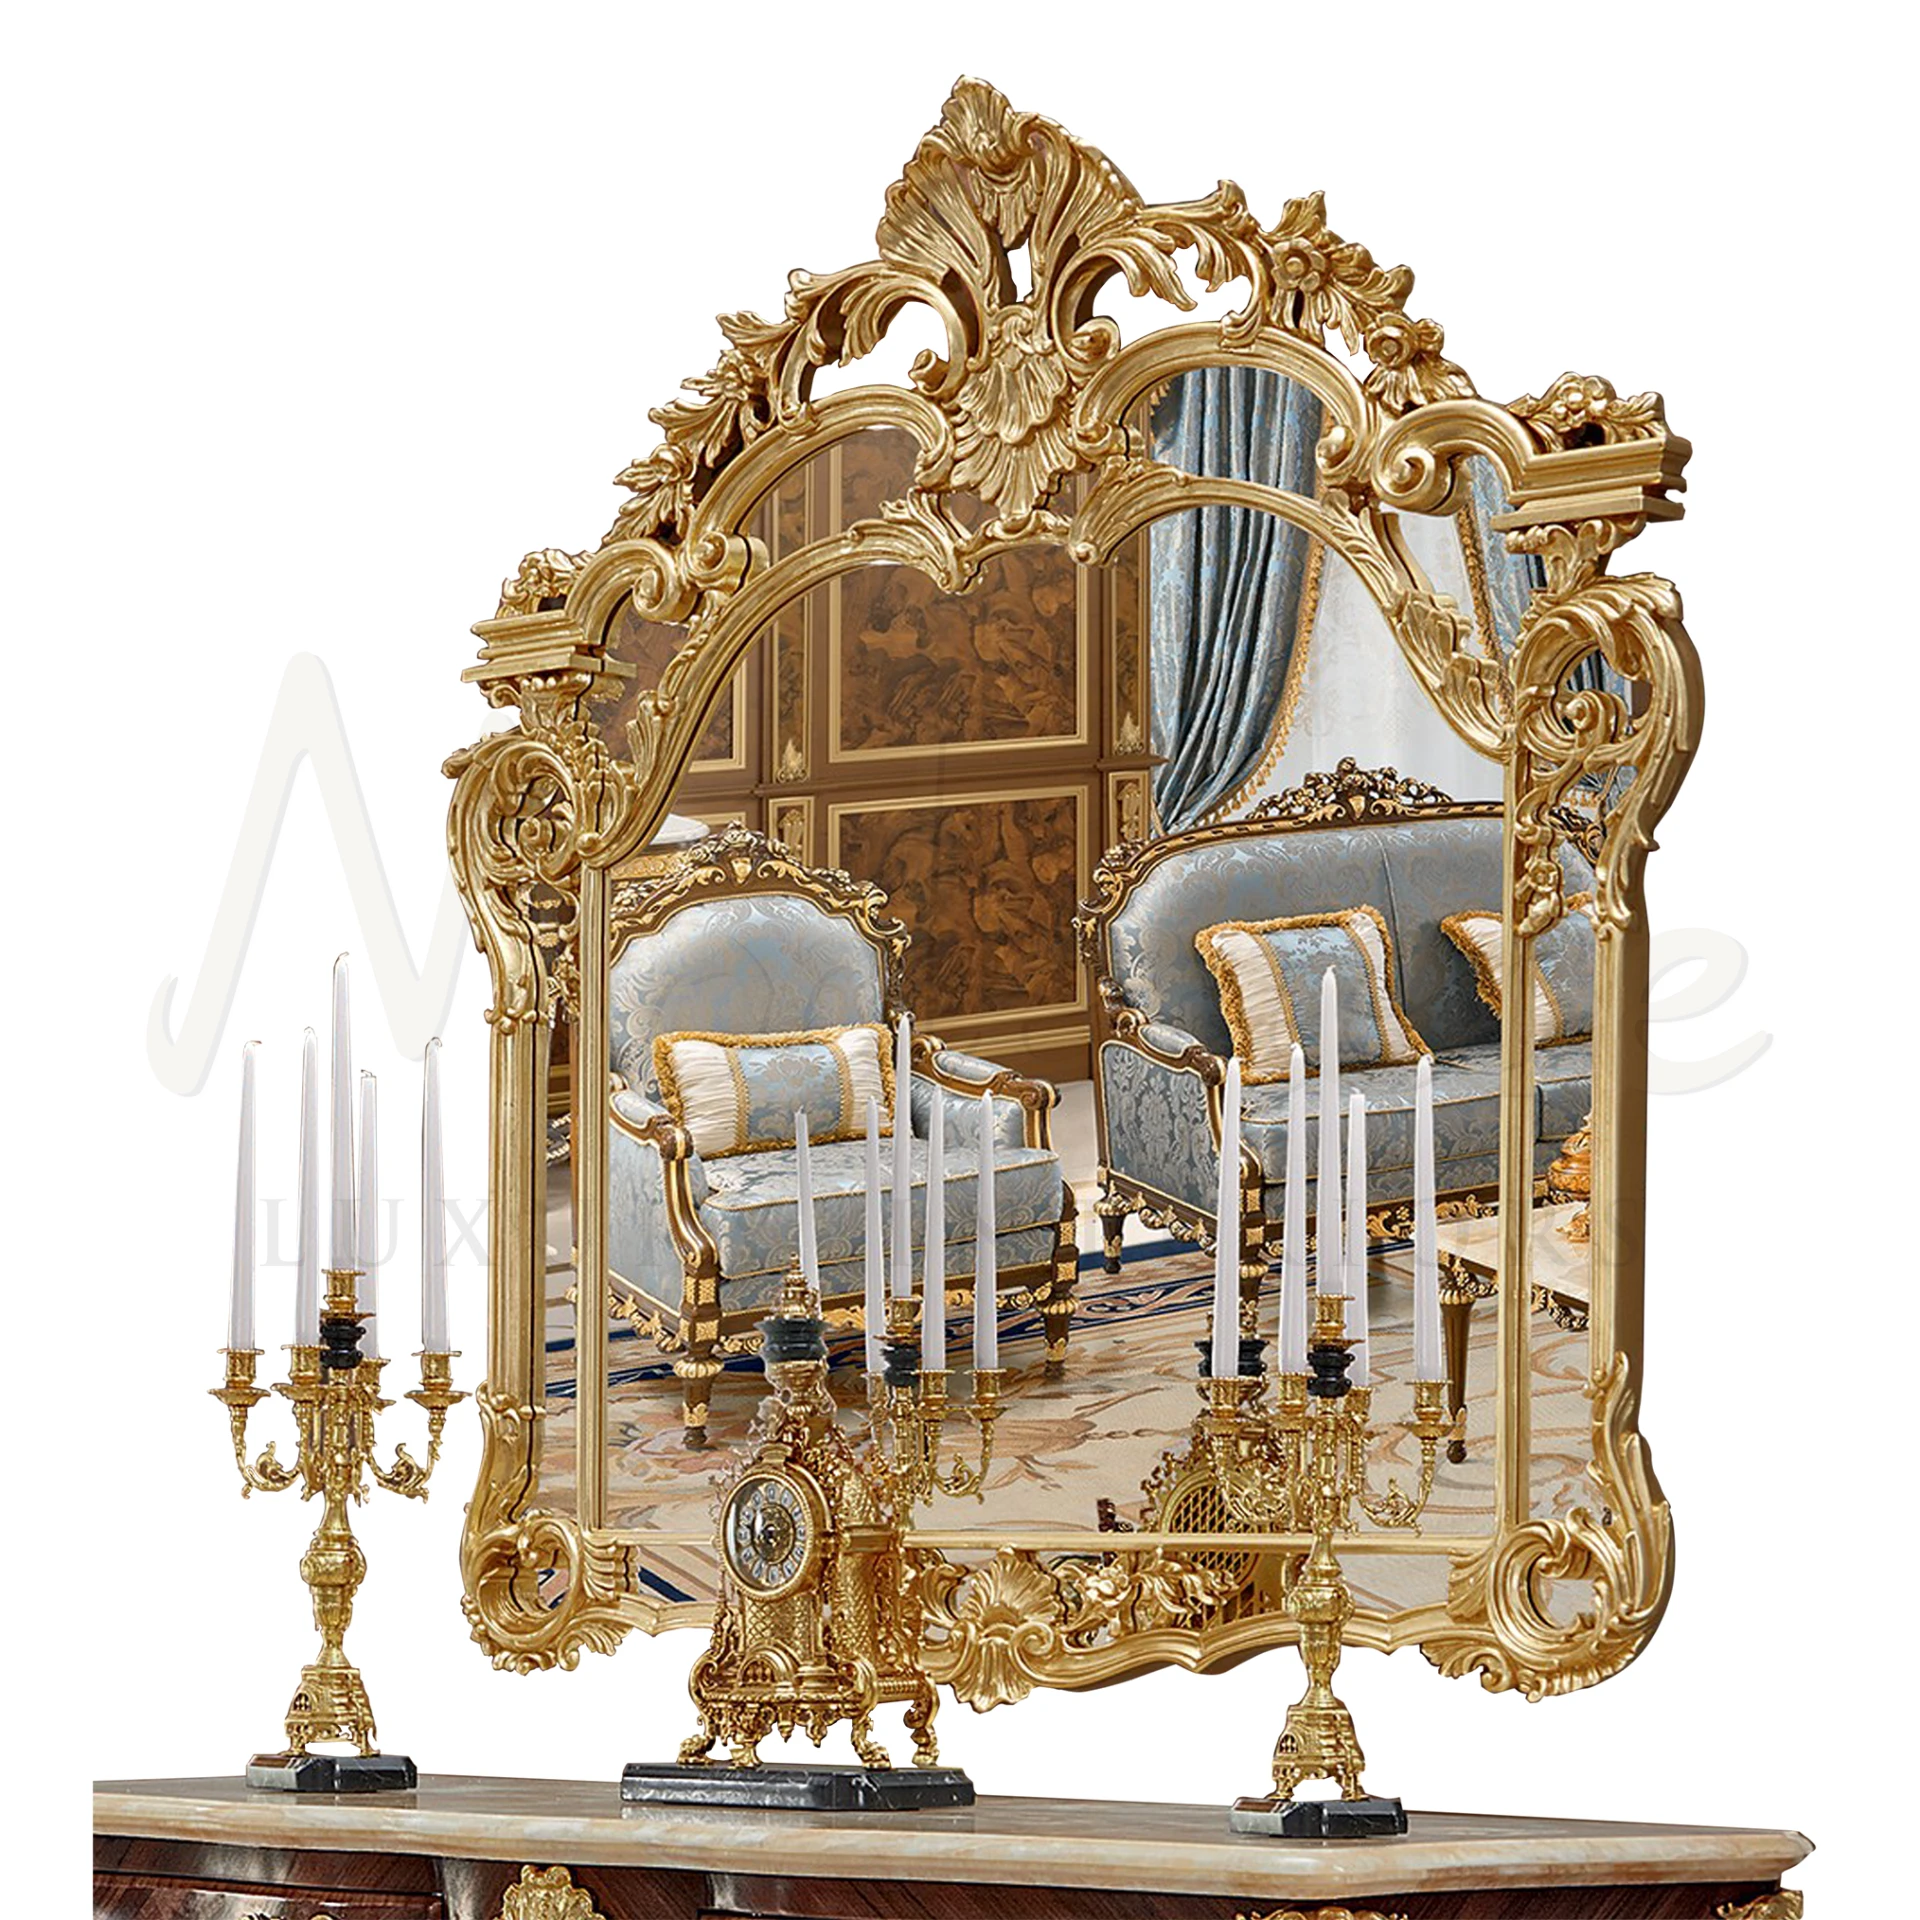 High-End Figured Mirror with gold leaf finish, a Modenese Furniture masterpiece, radiates luxury in interior design.